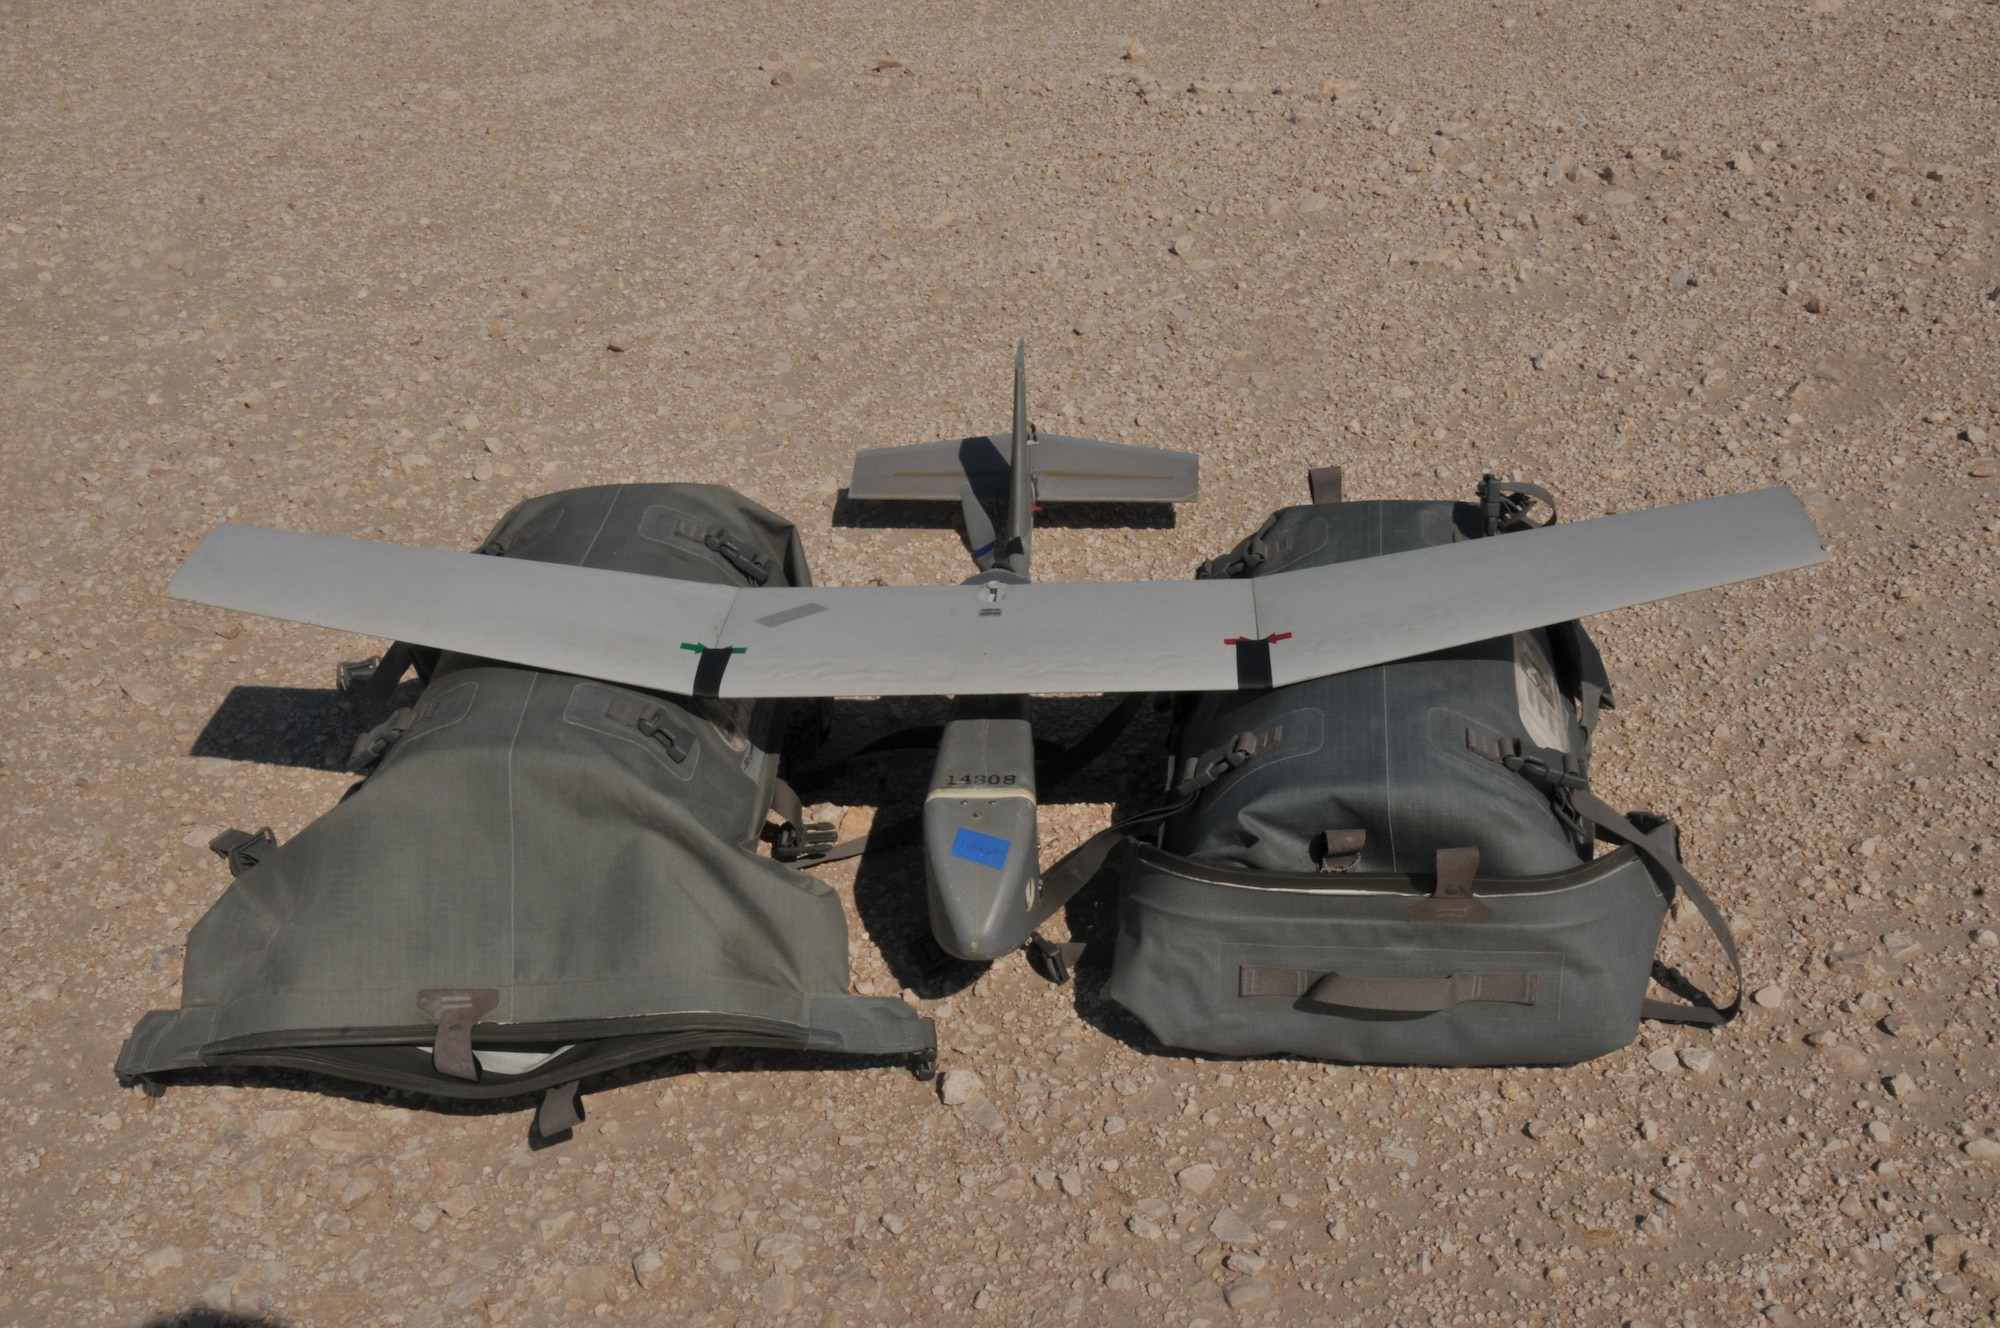 The Raven B Digital Data Link drone, a small unmanned aircraft or drone, it takes images and video of the base perimeter to ensure the safety of personnel at Al Udeid Air Base, Qatar. As the Raven B travels the preprogrammed route, it transmits still images and full motion video to a ground control system. The drone flies between 60-90 minutes depending on the weather. (U.S. Air Force photo by Tech. Sgt. Terrica Y. Jones/Released) 